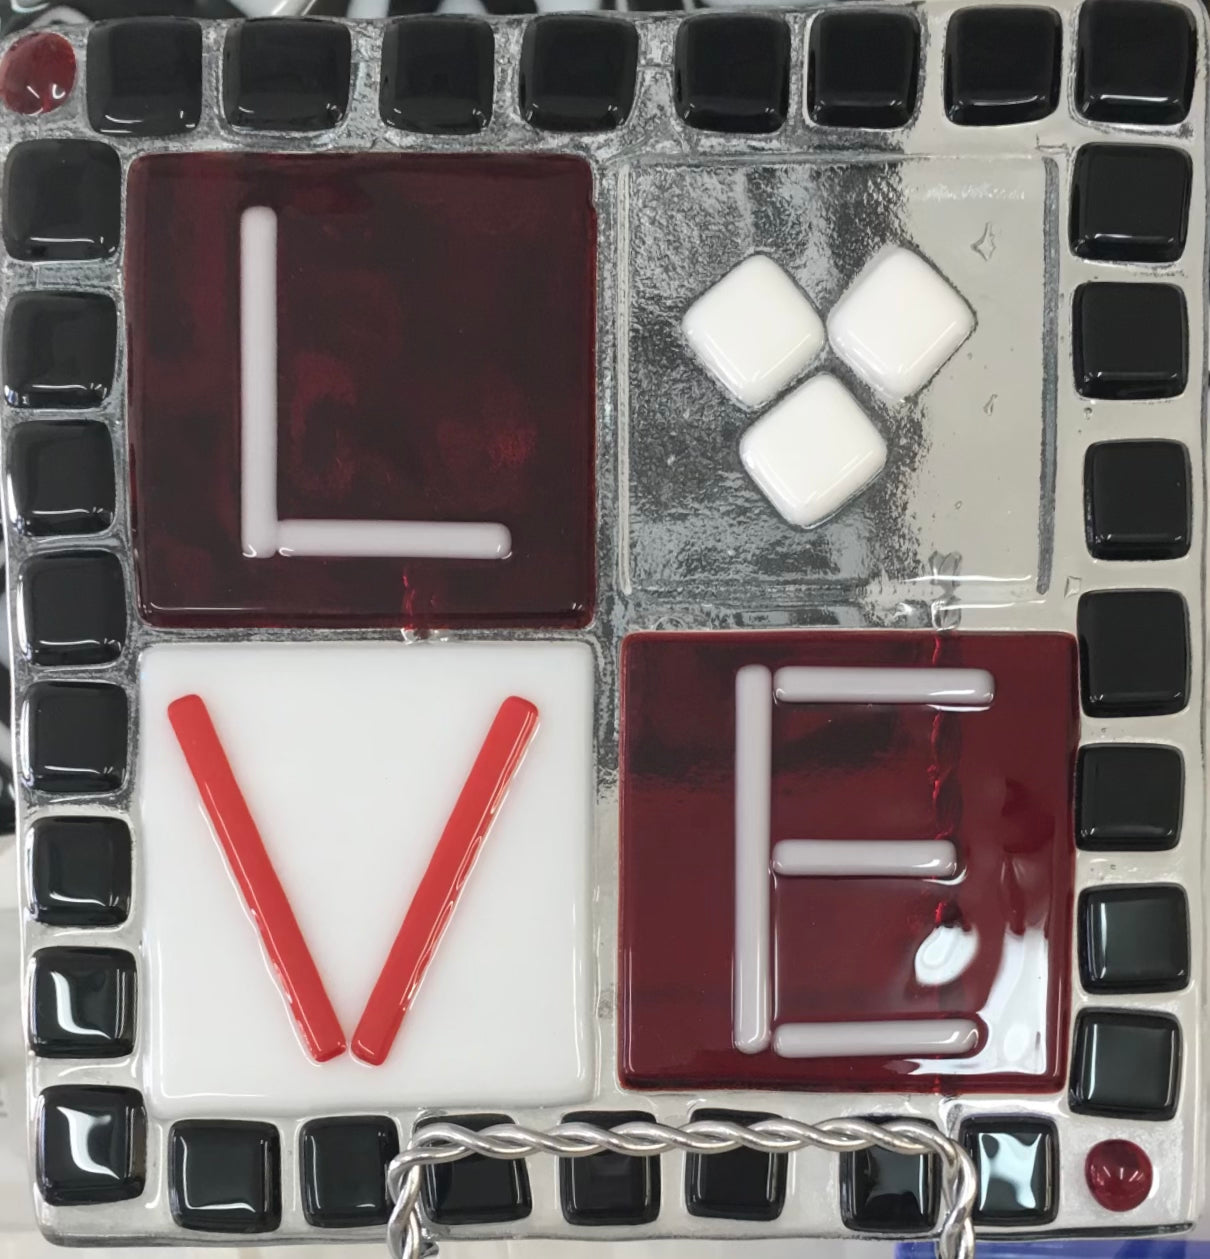 6" plate Fused glass, May 10, 12:00- 2:00